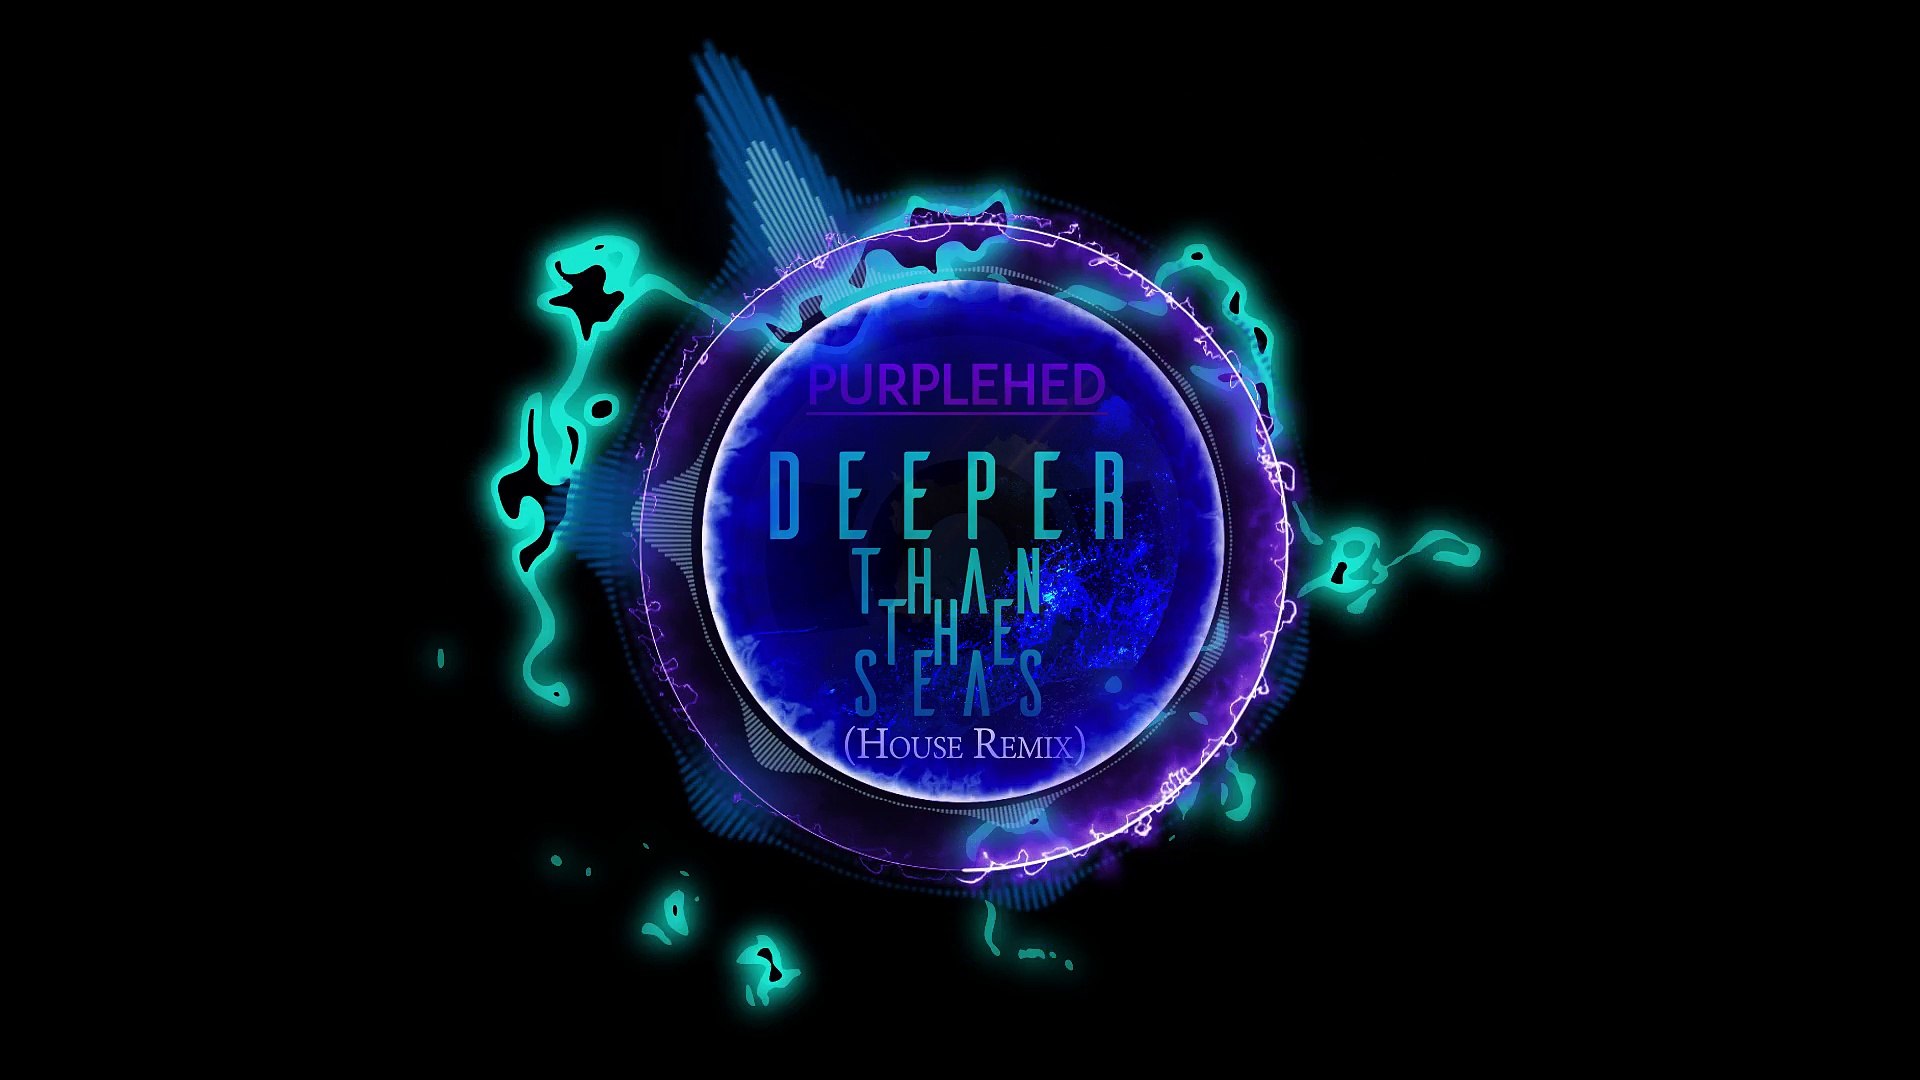 Music video for Deeper Than the Seas (House Remix) performed by Purplehed.